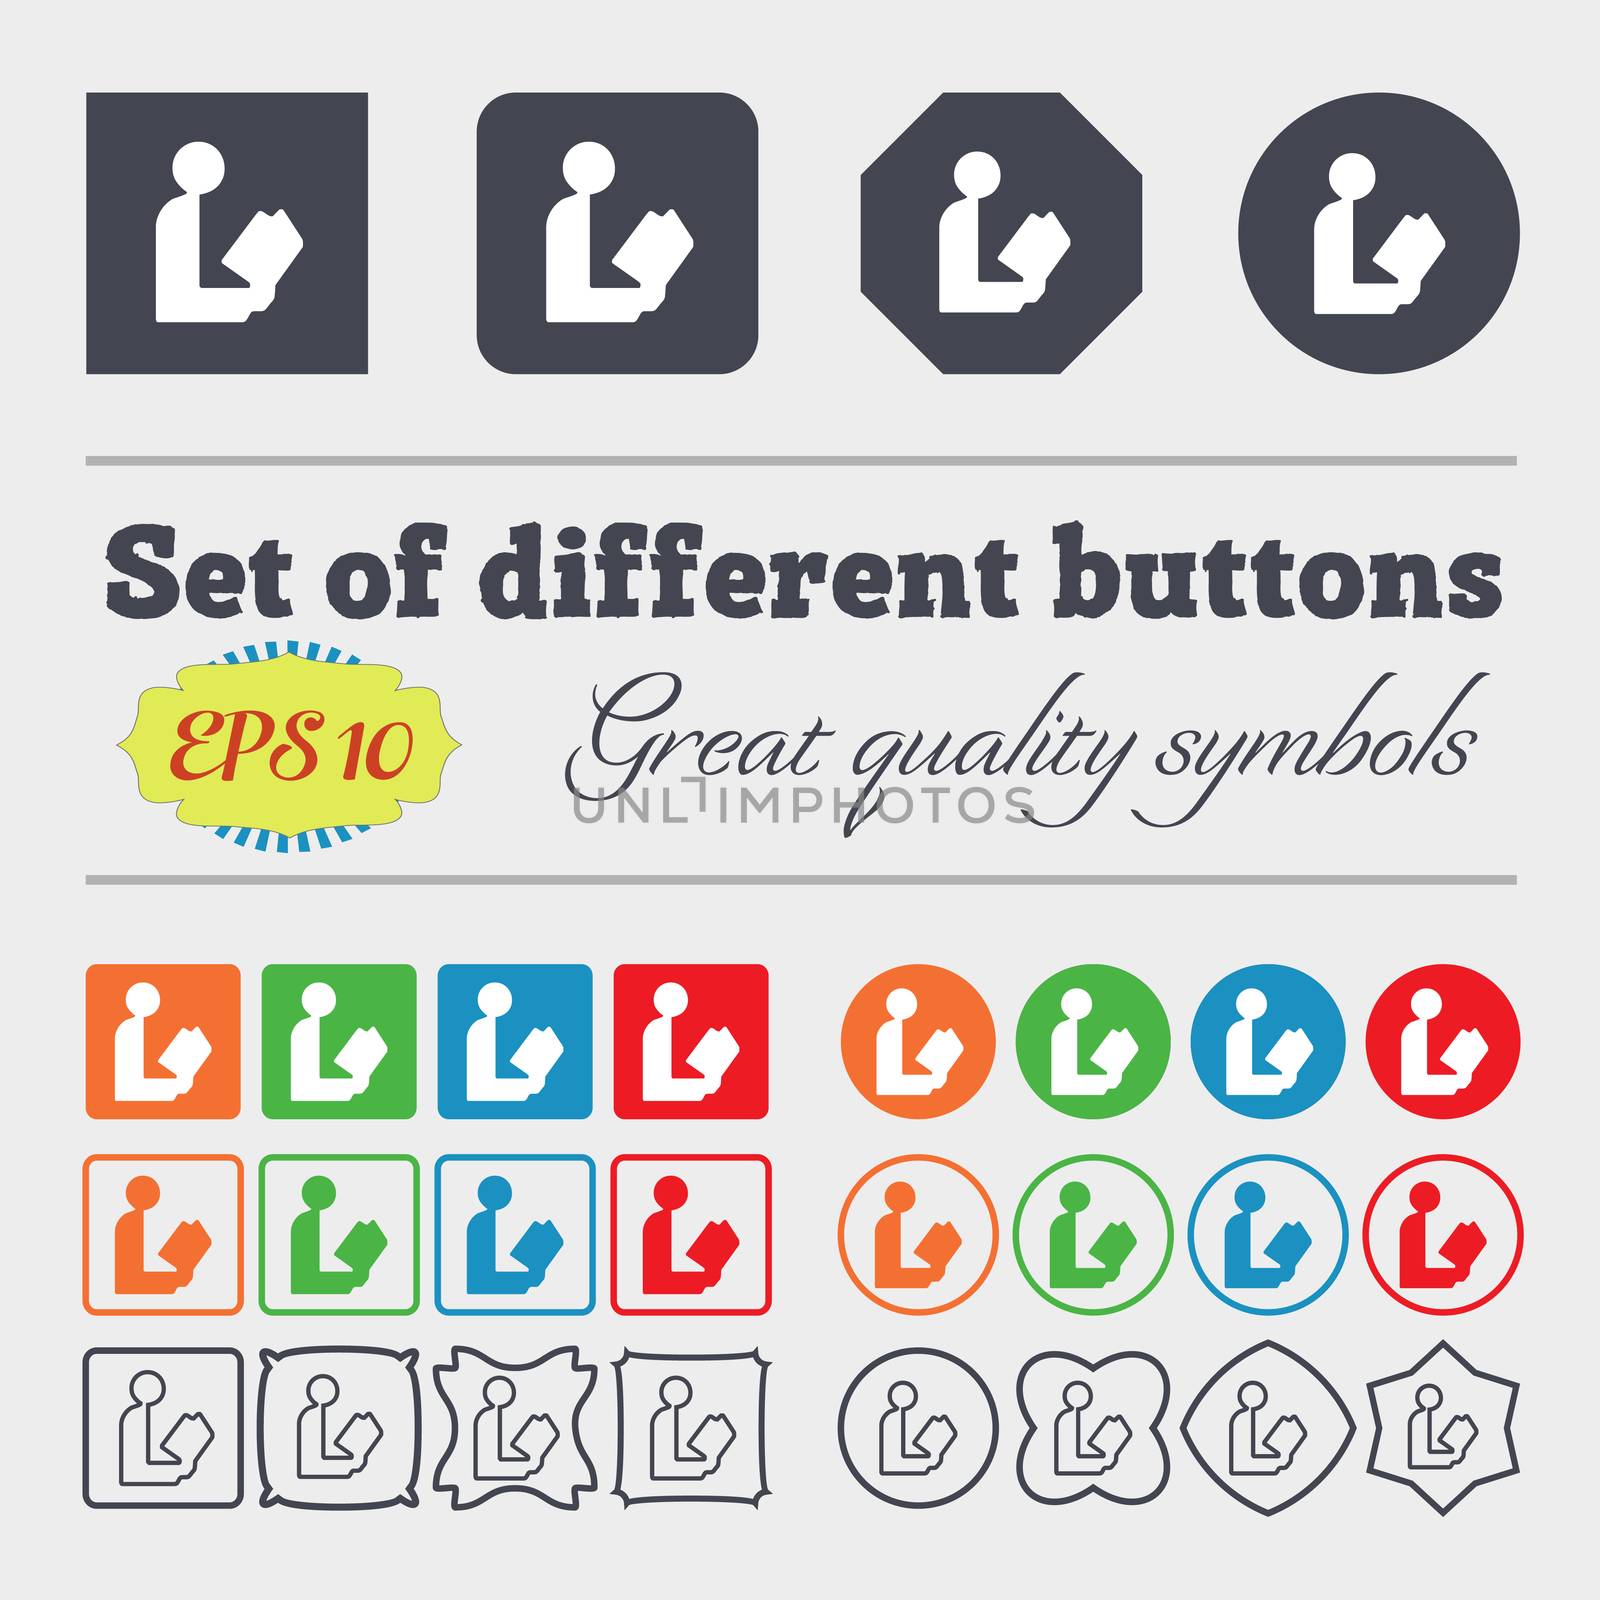 read a book icon sign. Big set of colorful, diverse, high-quality buttons. illustration